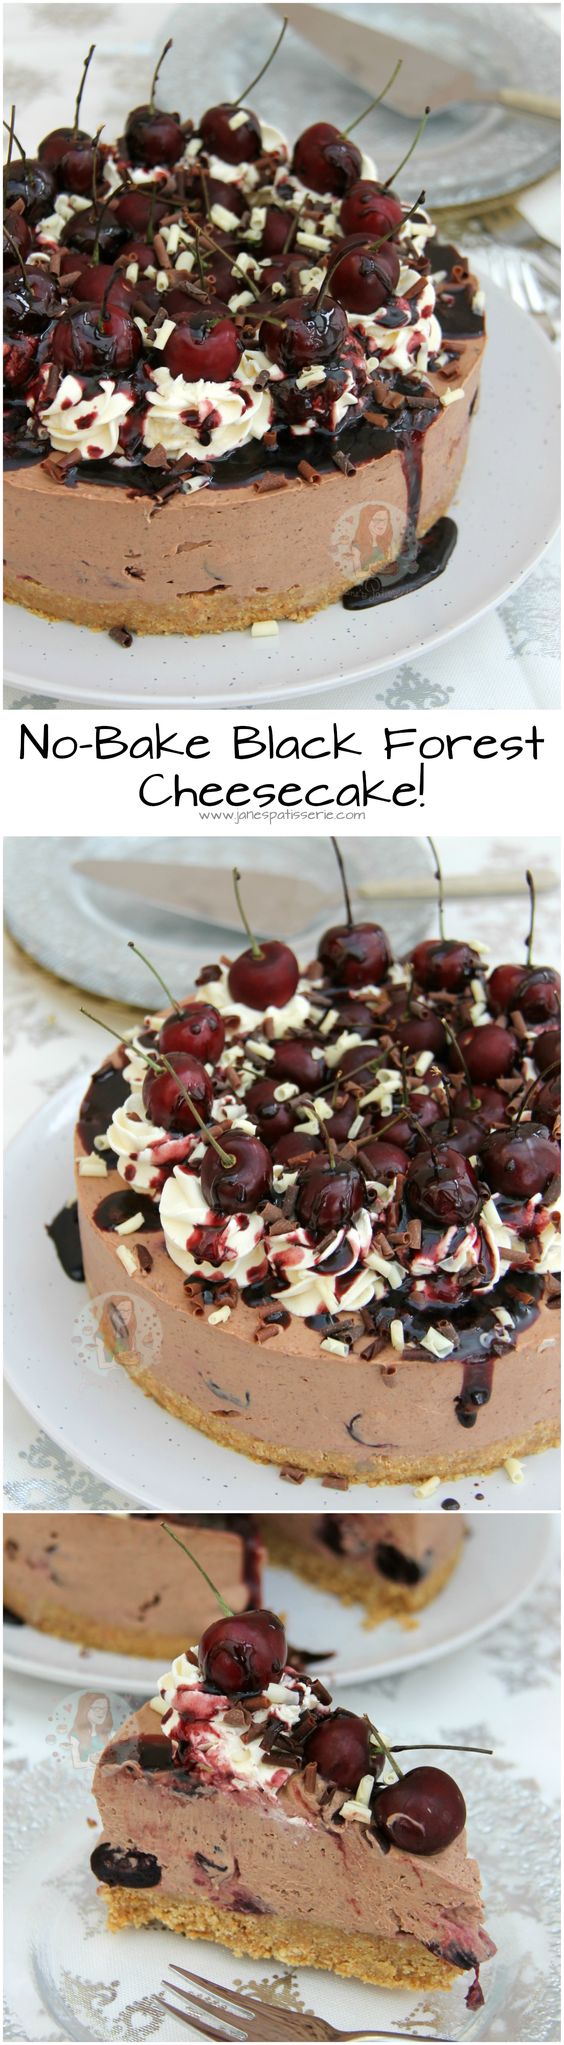 black forest cheesecake recipe without sour cream